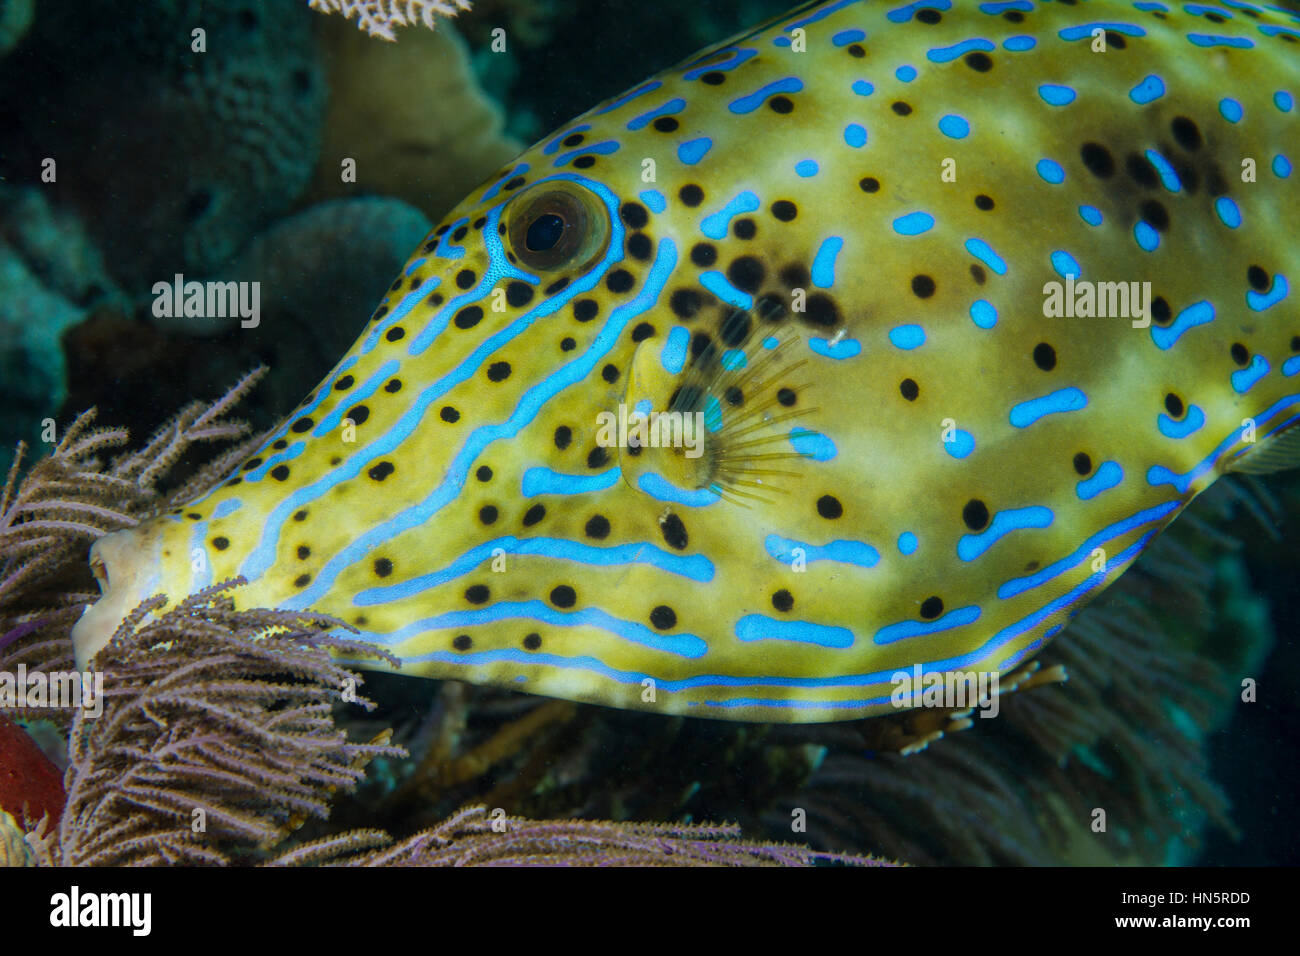 Iridescent blue lines mark the face and body of a Scrawled filefish. Stock Photo